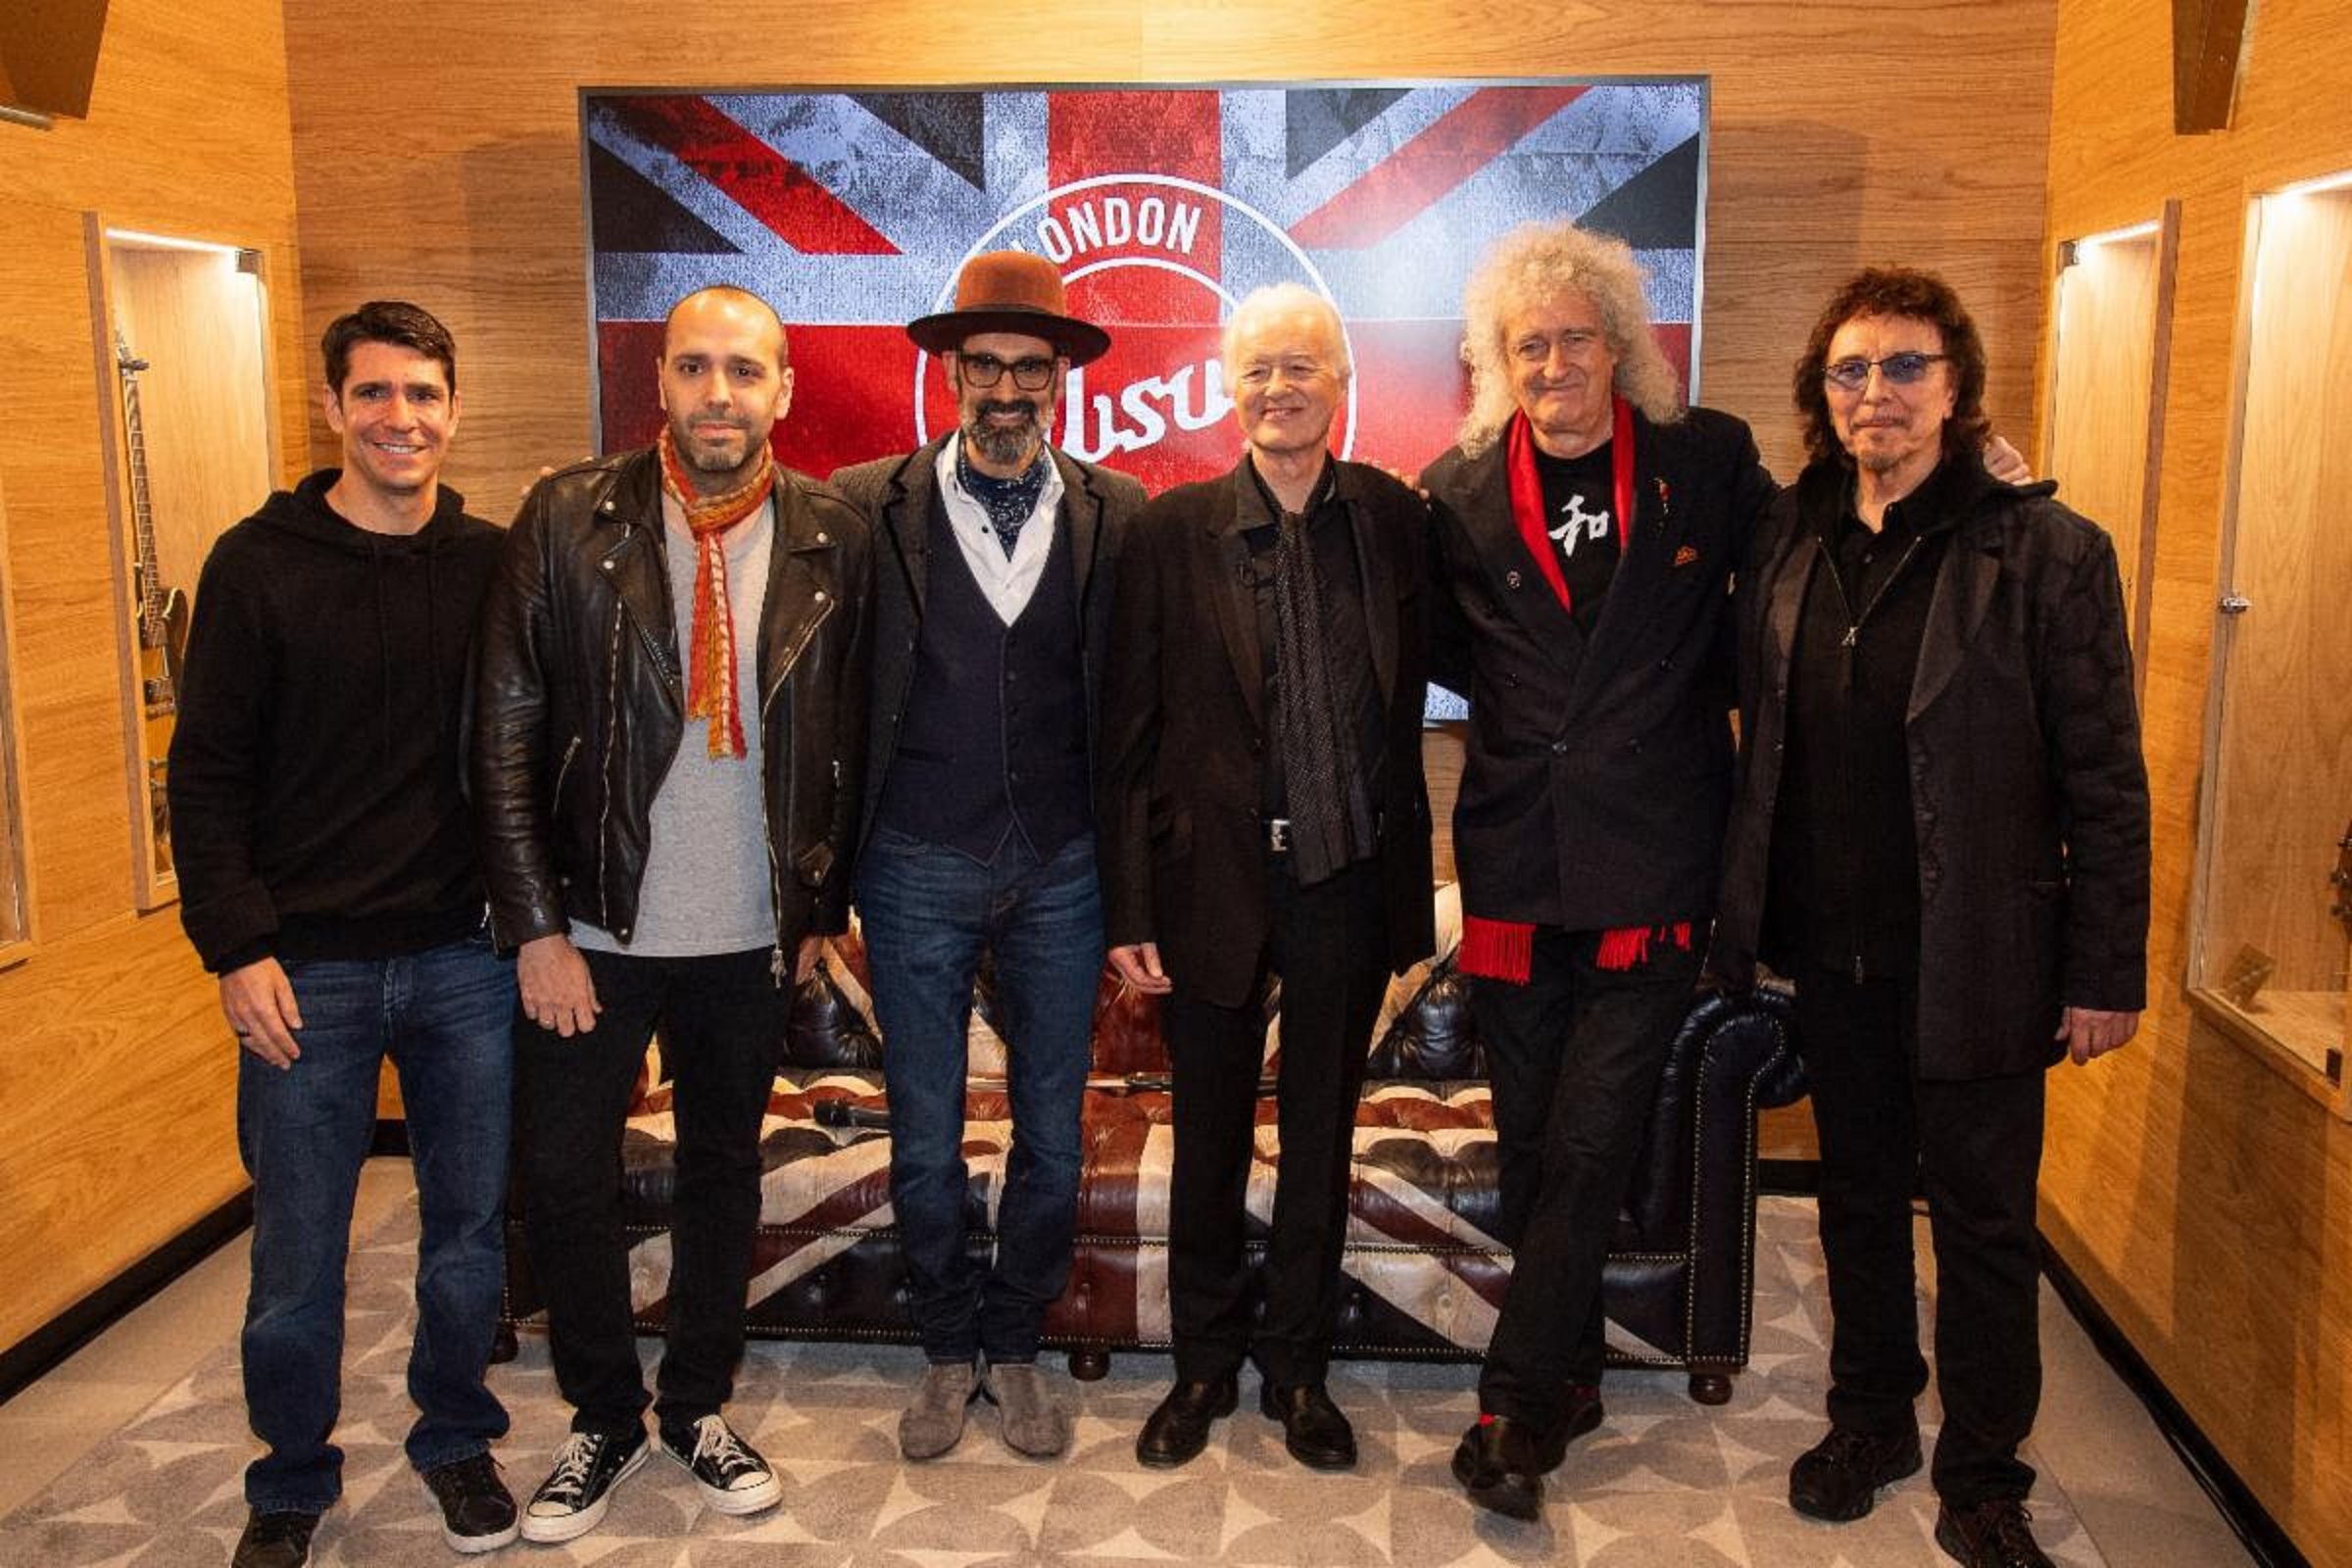 Gibson Garage London: Jimmy Page, Tony Iommi, Sir Brian May, James Bay, and More Celebrate Groundbreaking Flagship Store in London, Public Grand Opening on Saturday, February 24